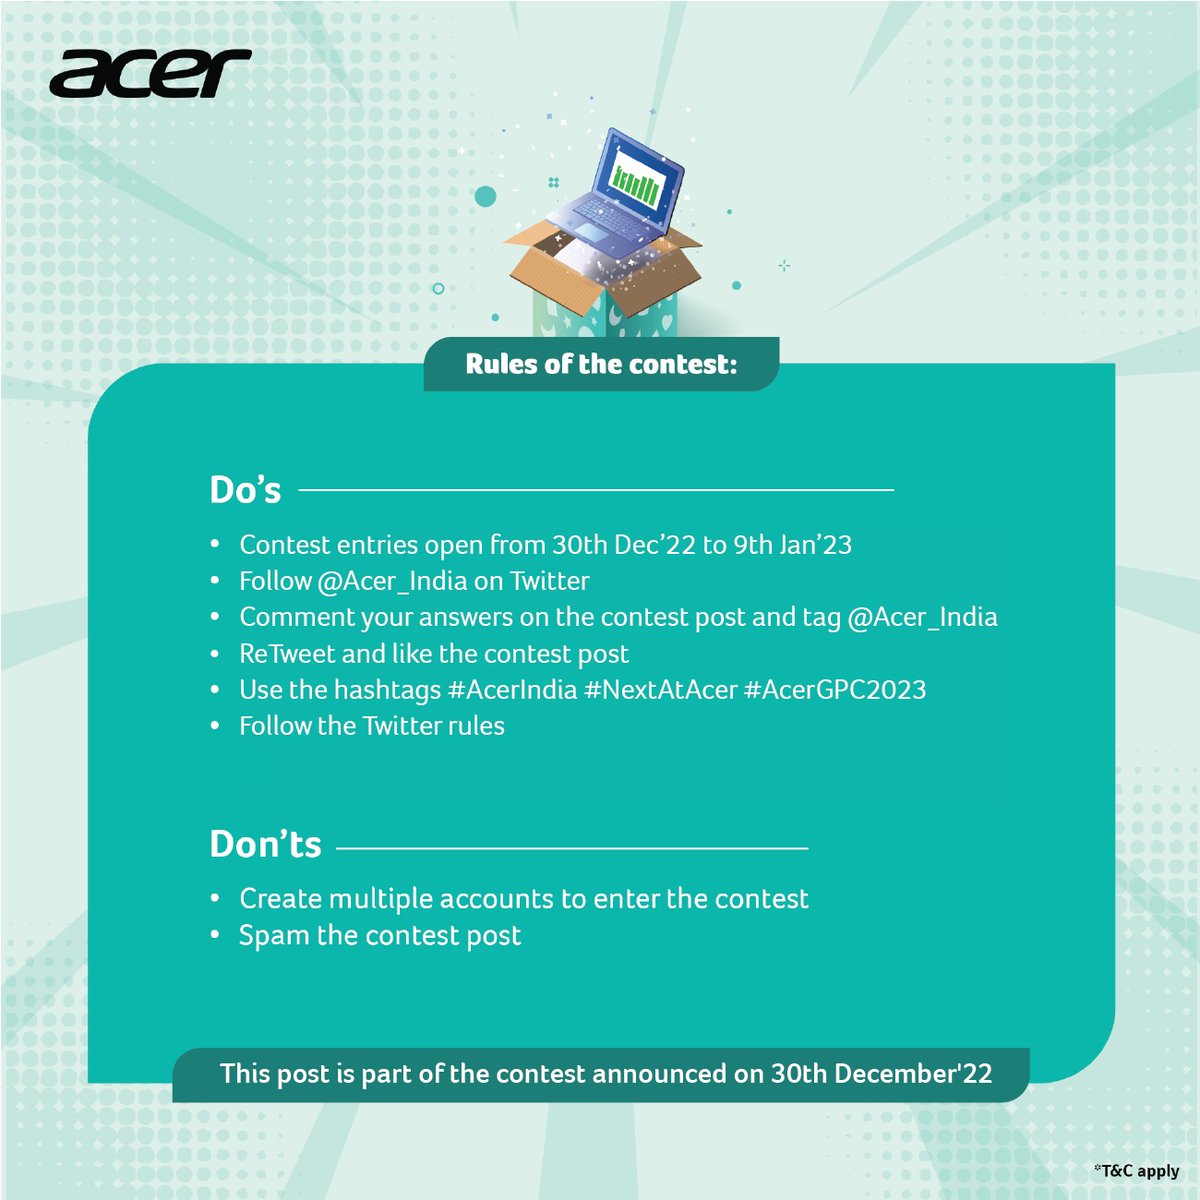 At Acer we love Technology. Join our contest and comment & retweet the most anticipated Acer laptop series announced during #NextAtAcer. All answers will be entered into a lucky draw to win exciting prizes.

Rules: rb.gy/3efc0w

#Acer #NextAtAcer #AcerGPC2023